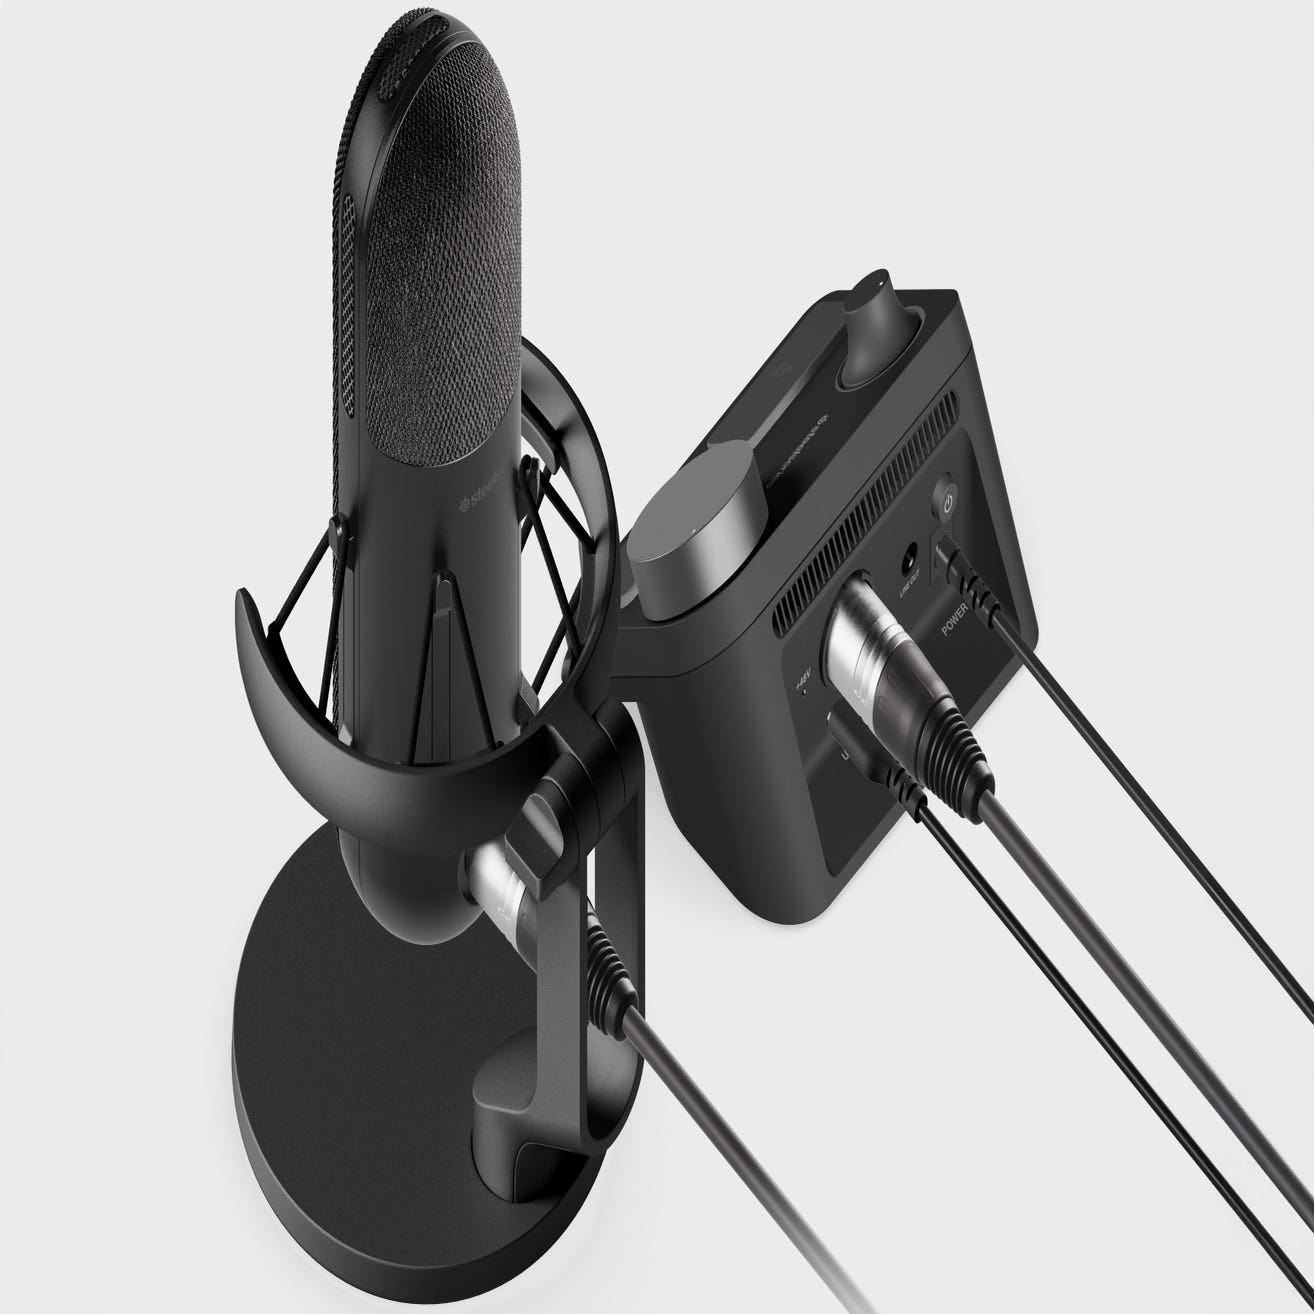 SteelSeries Alias/Alias Pro microphone review: a new level of plug-and-play  quality